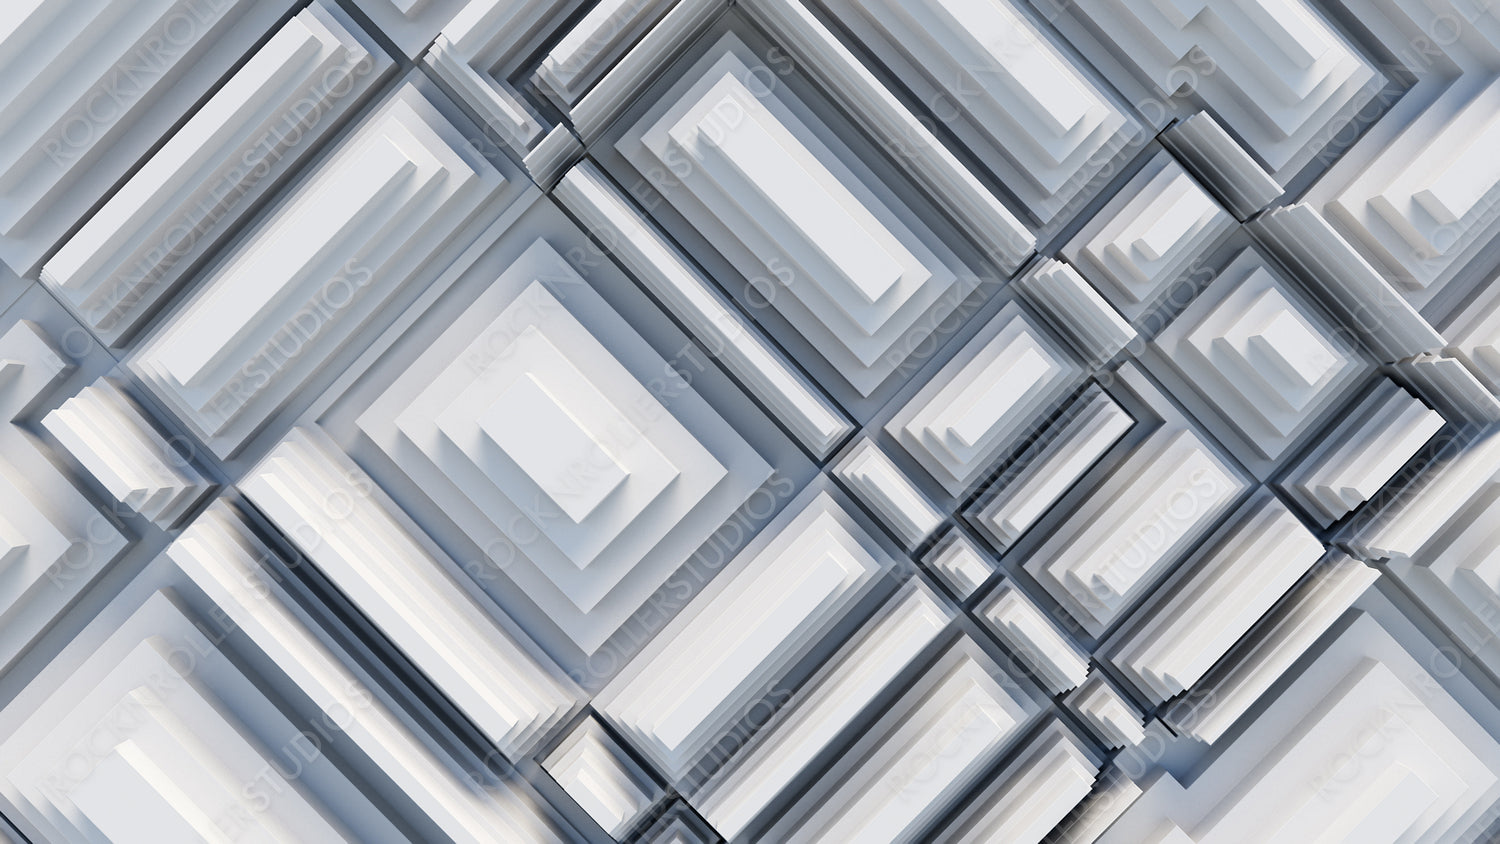 White, Tech Background with a Geometric 3D Structure. Clean, Stepped design with Extruded Futuristic Forms. 3D Render.